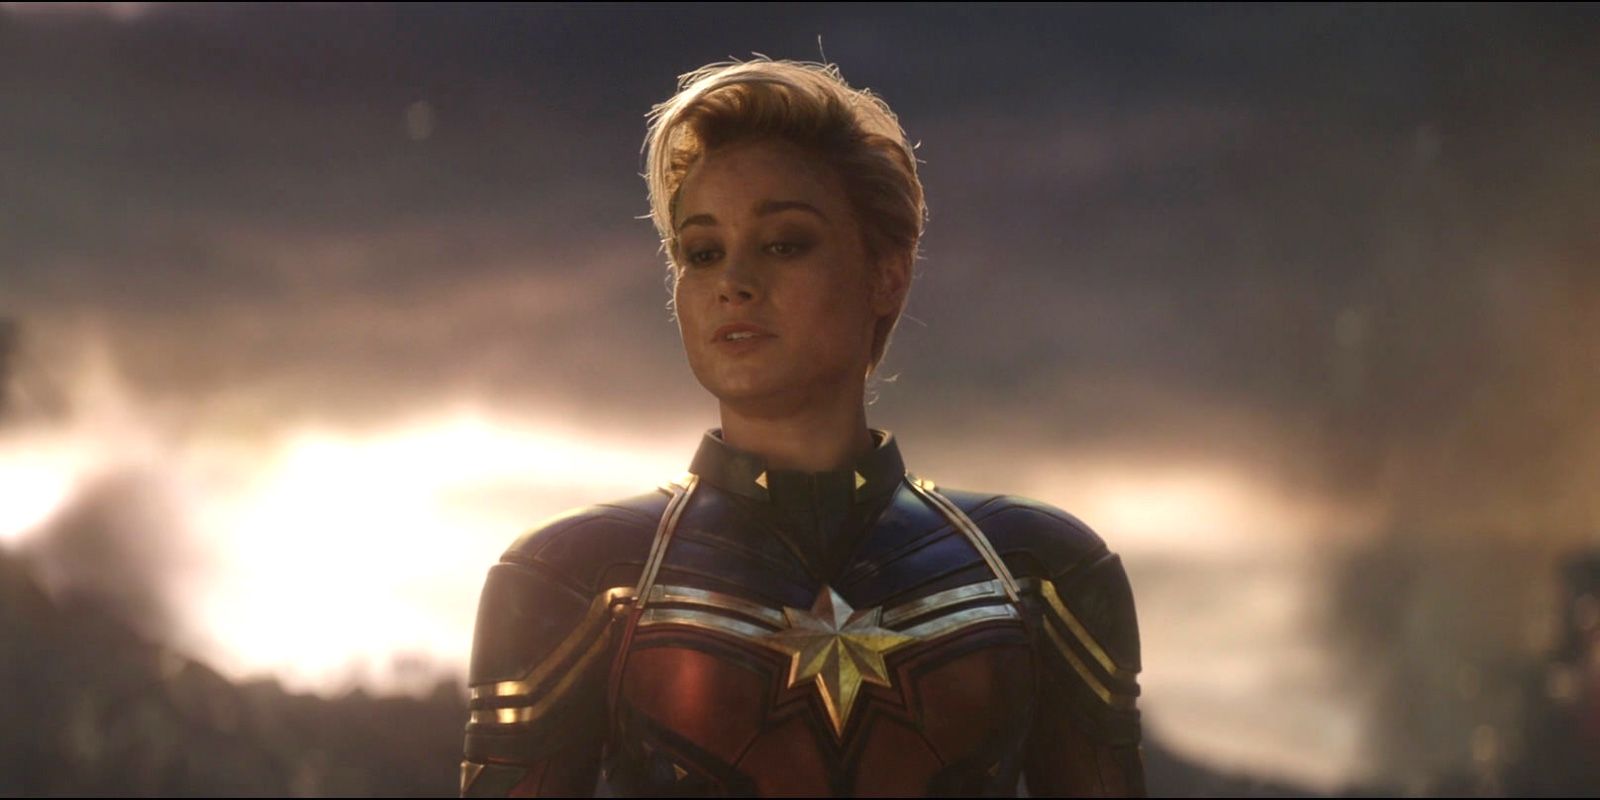 New Look At Brie Larson #39 s Captain Marvel 2 Training In Workout Video